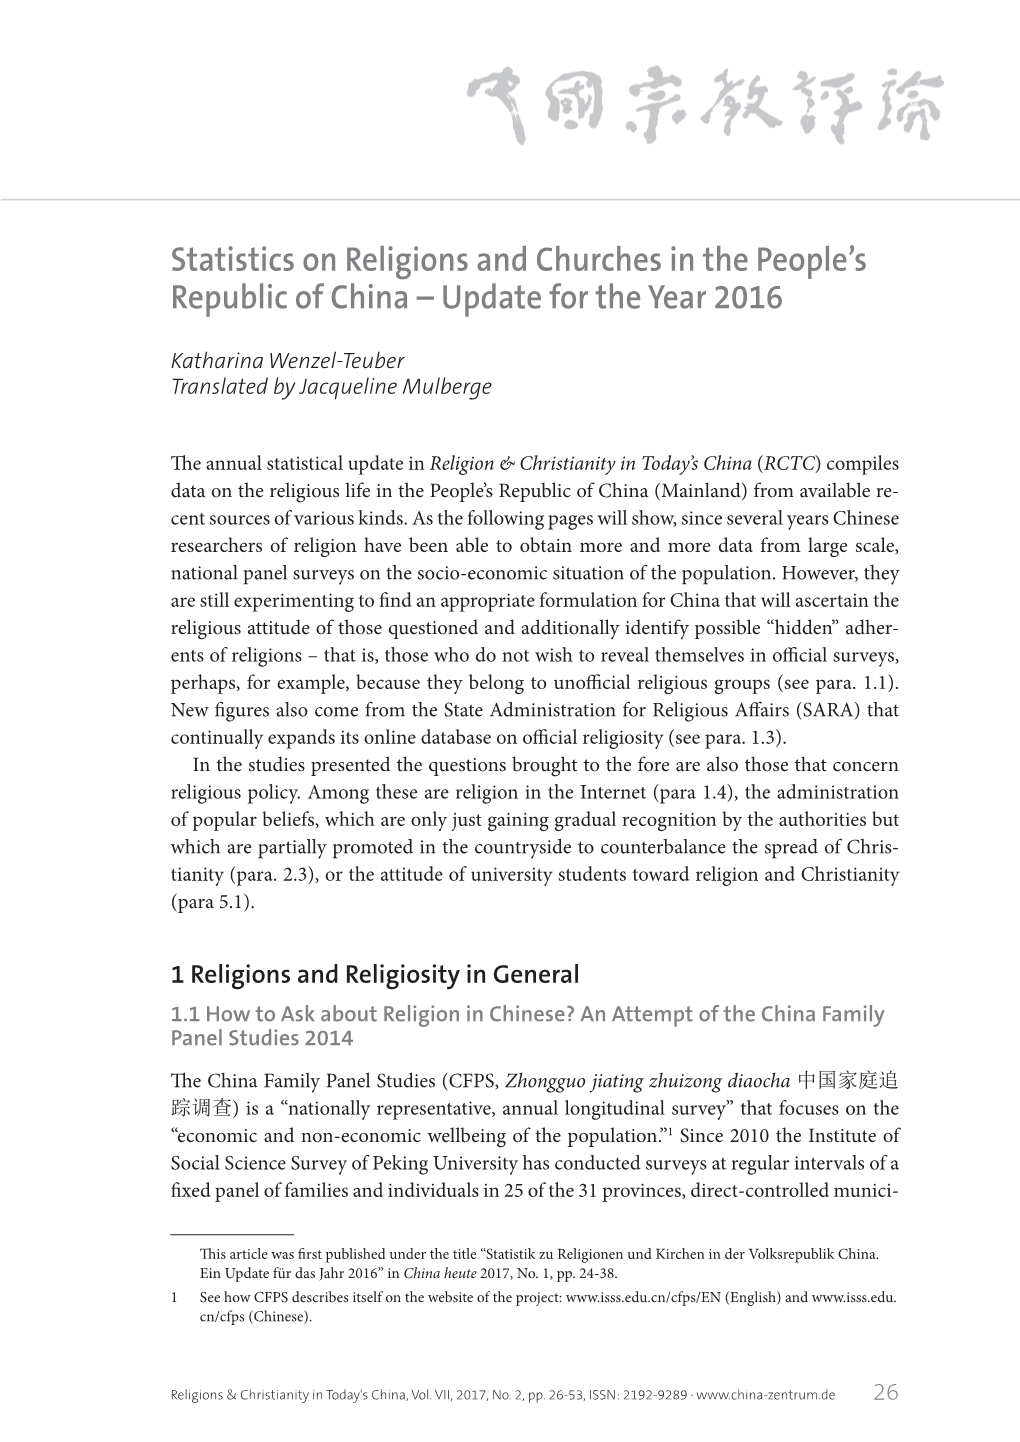 Statistics on Religions and Churches in the People's Republic of China